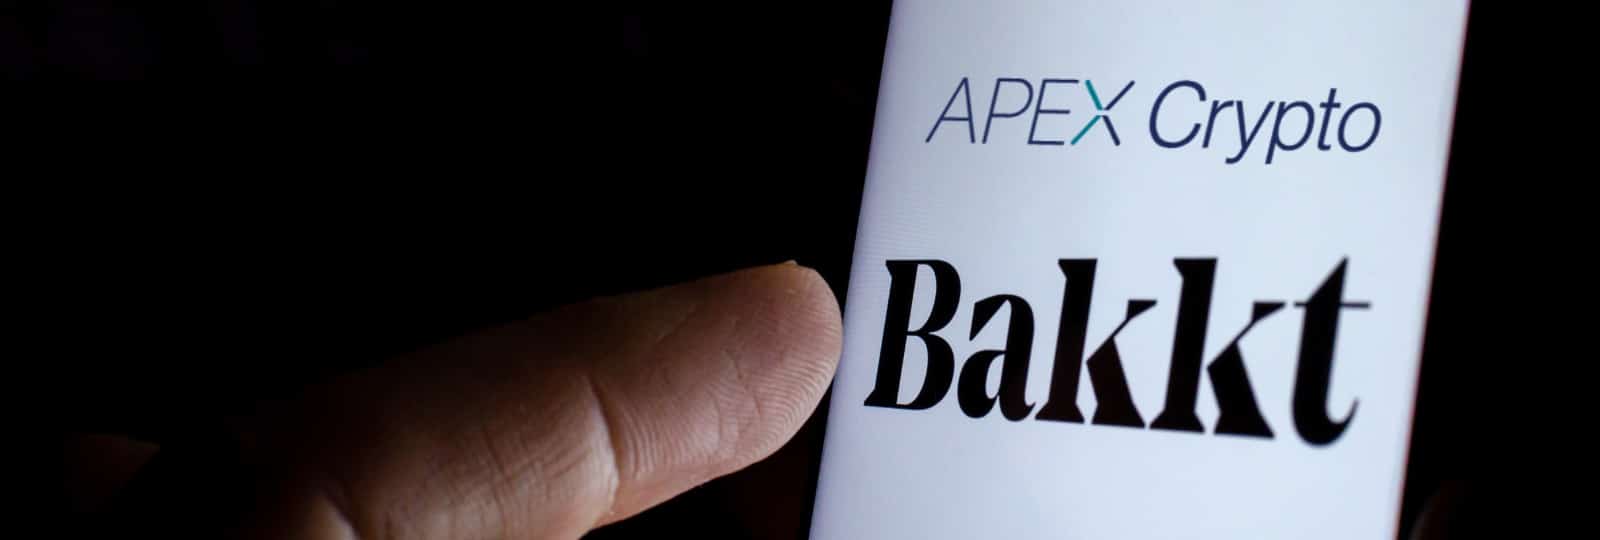 Bakkt Holdings Inc. completes the acquisition of Apex Crypto LLC